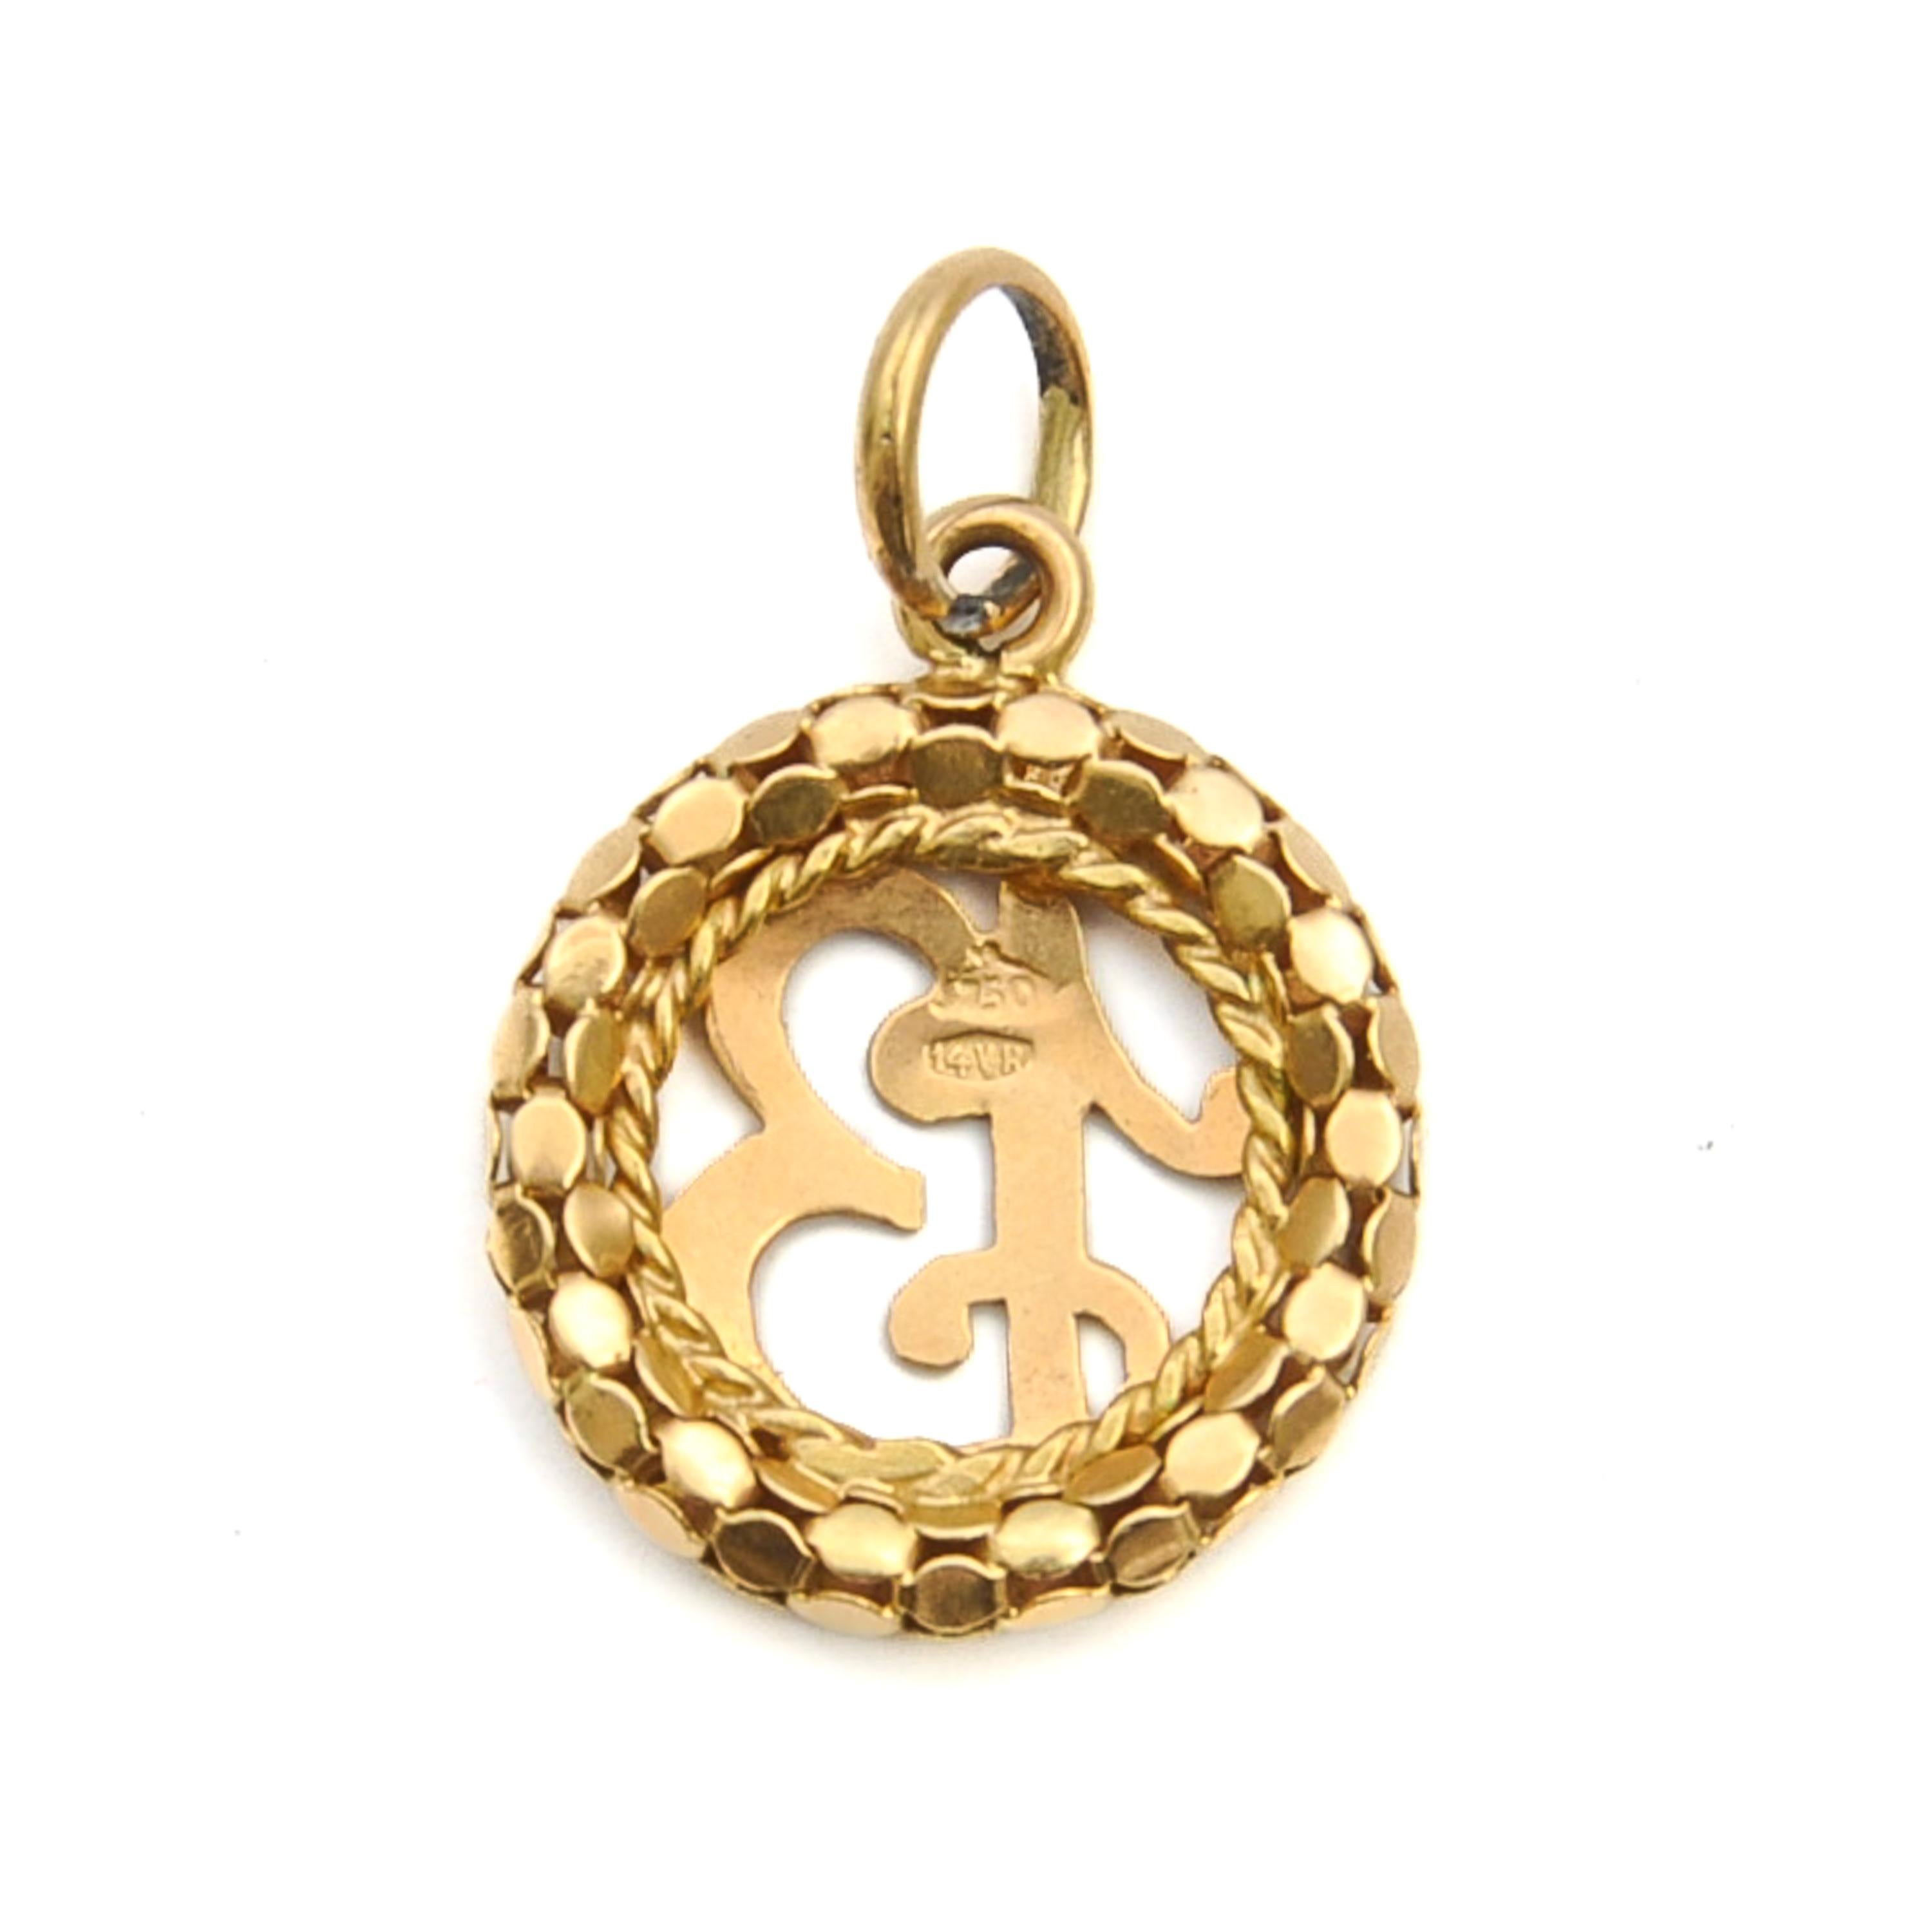 Vintage 18K Gold Number Thirteen Mesh Popcorn Charm Pendant In Good Condition For Sale In Rotterdam, NL